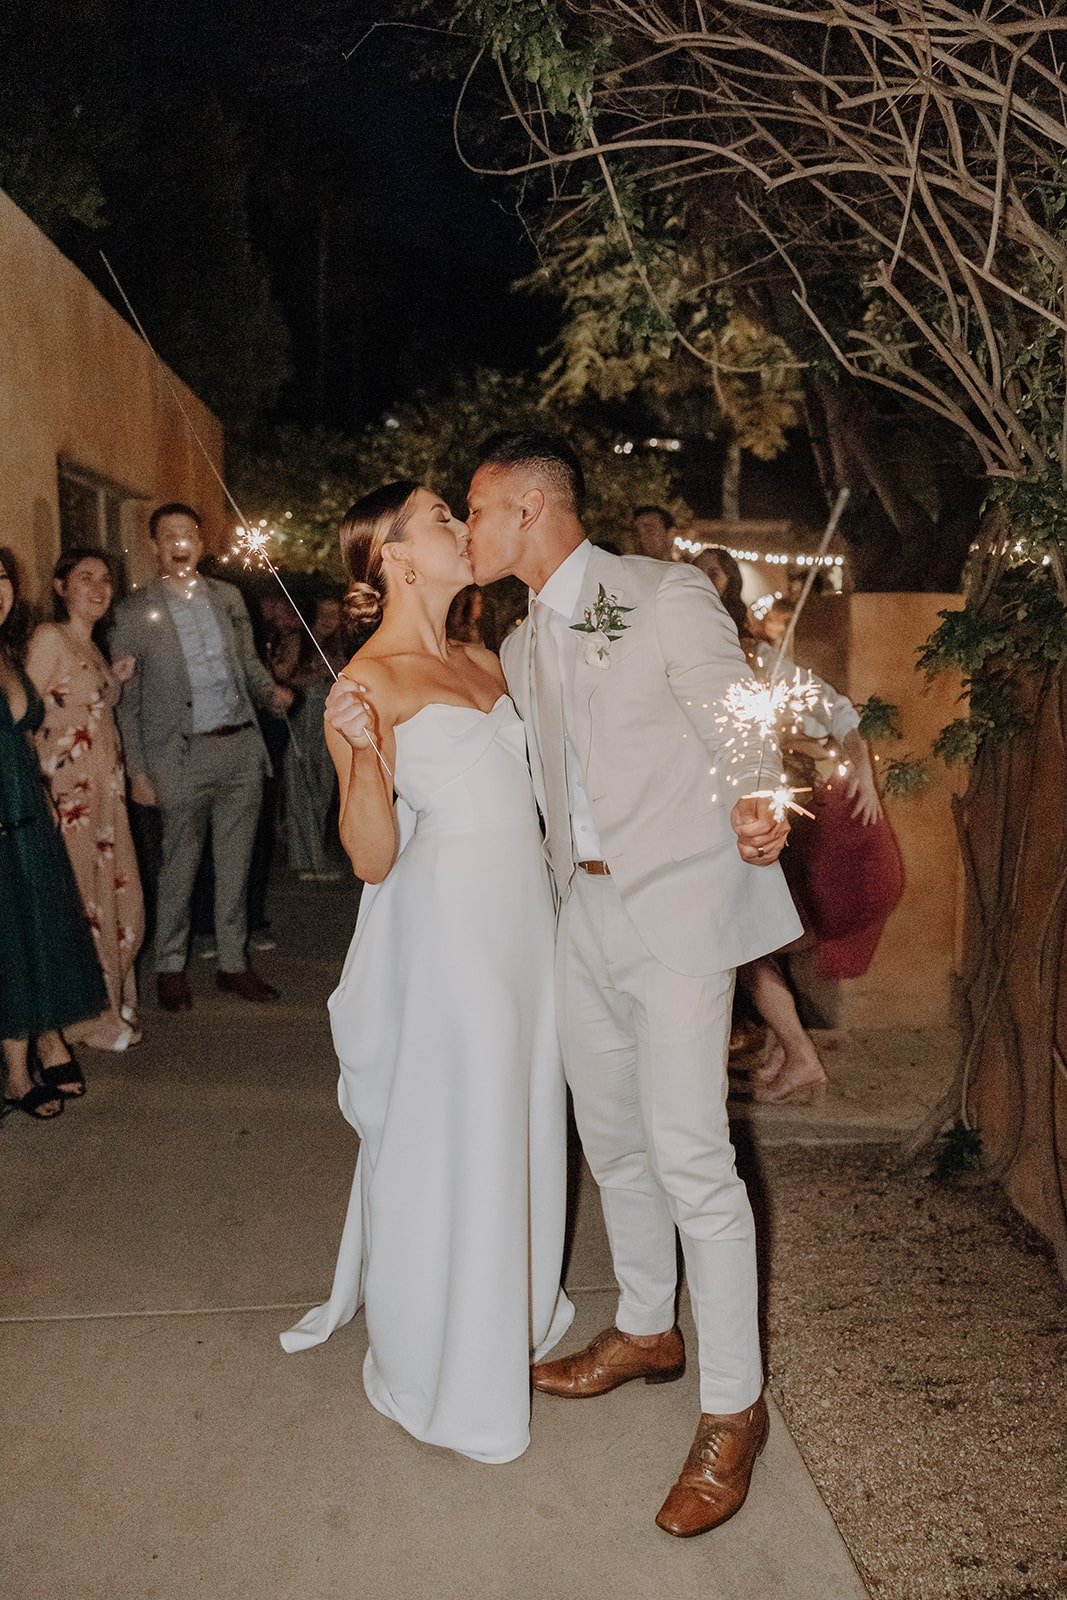 Bride and groom kiss during sparkler exit at luxury resort wedding in Arizona